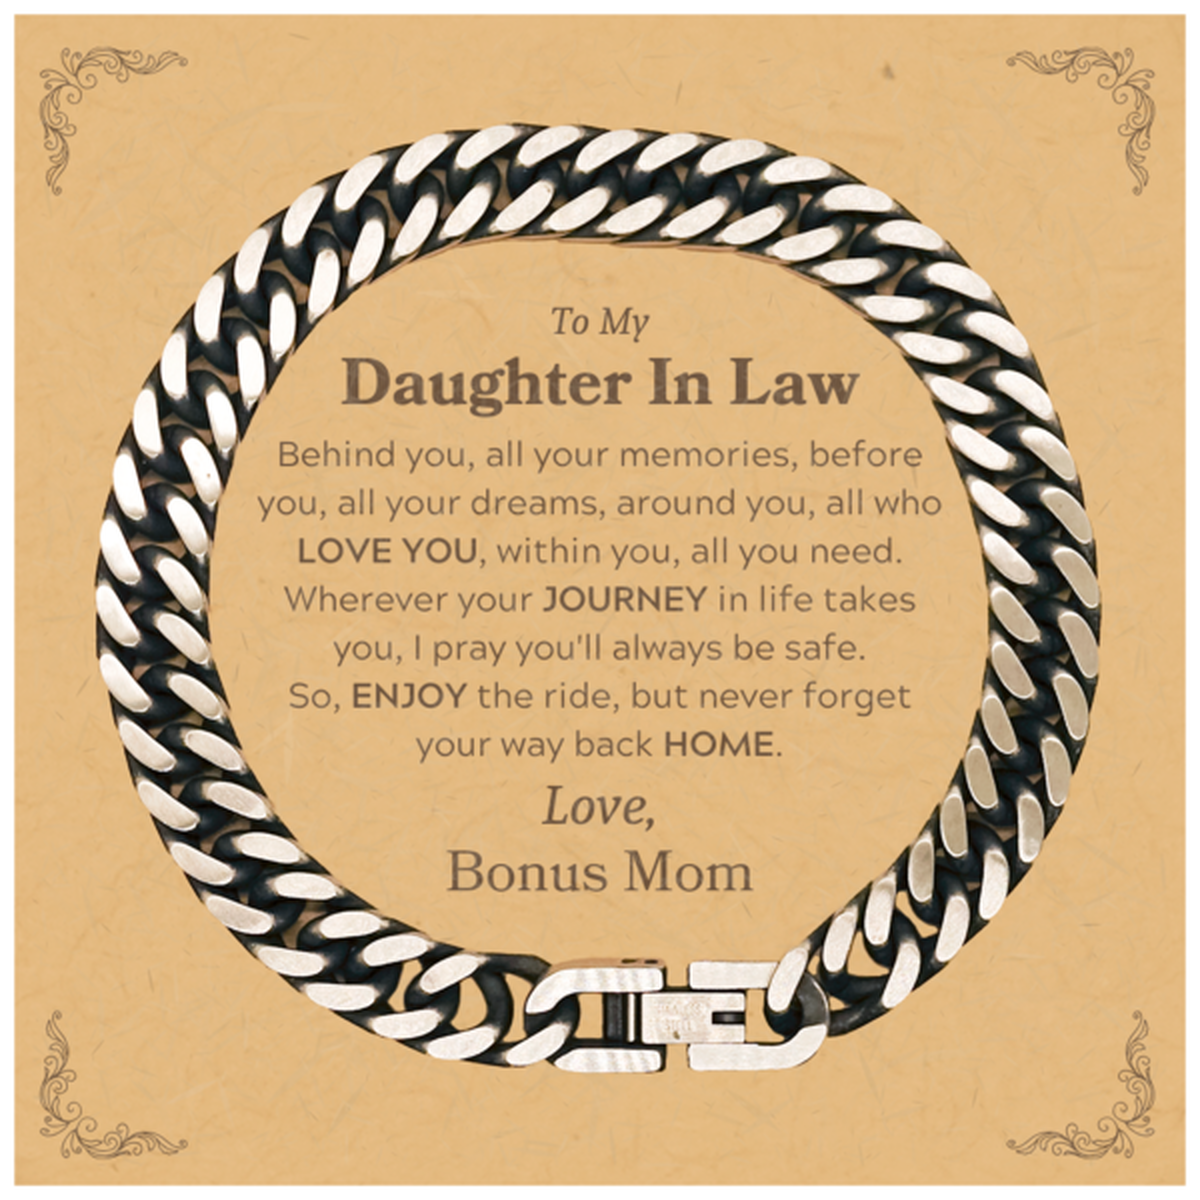 To My Daughter In Law Graduation Gifts from Bonus Mom, Daughter In Law Cuban Link Chain Bracelet Christmas Birthday Gifts for Daughter In Law Behind you, all your memories, before you, all your dreams. Love, Bonus Mom